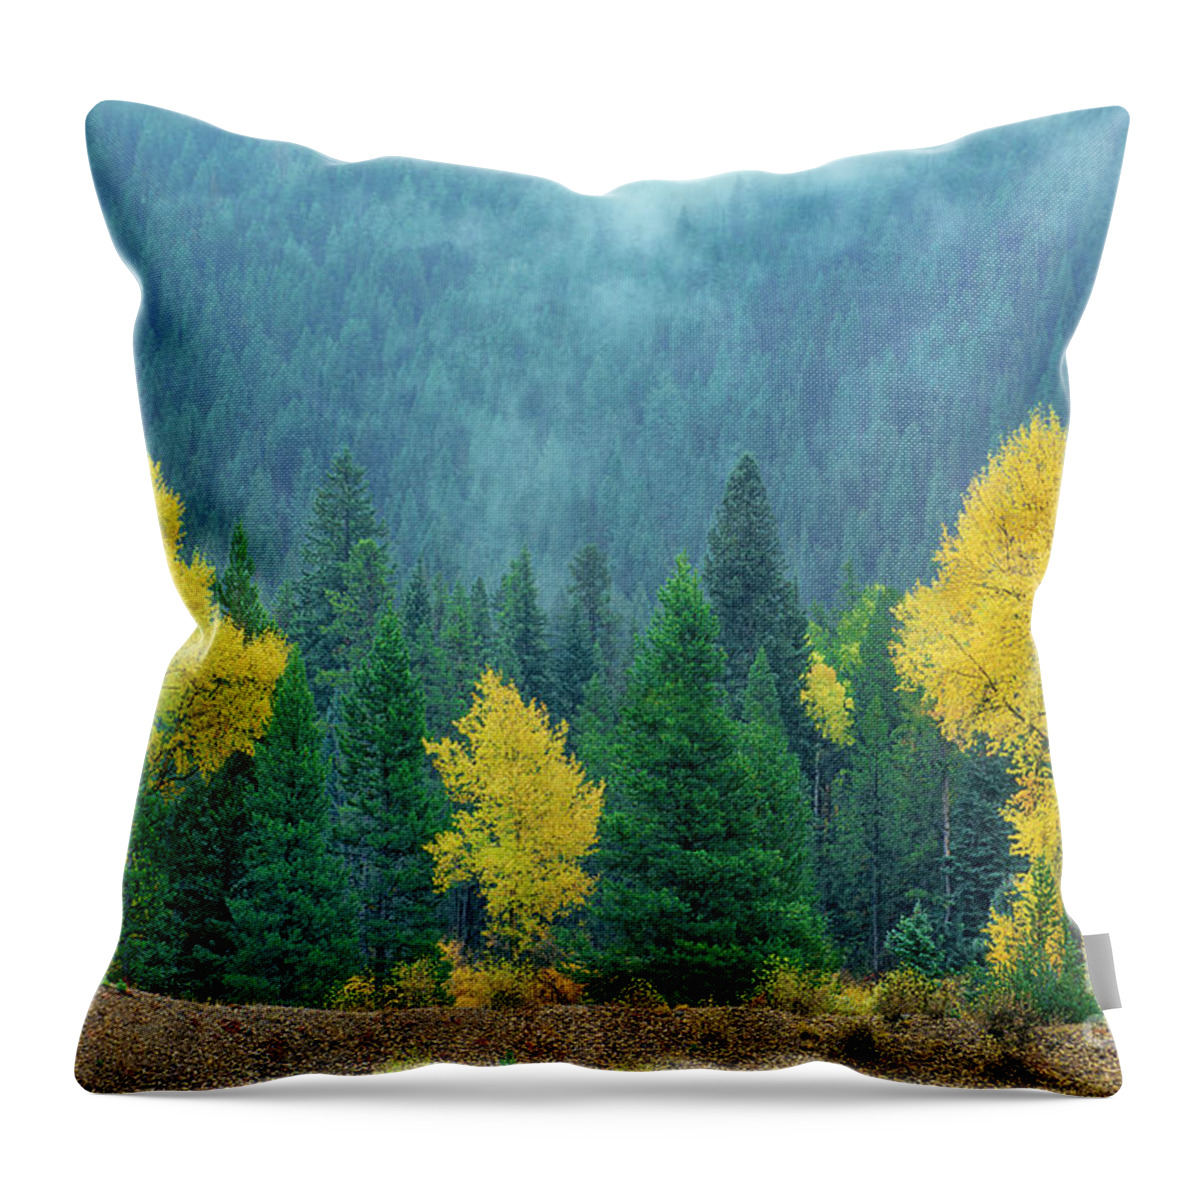 Dave Welling Throw Pillow featuring the photograph Narrowleaf Cottonwoods And Blur Spruce Trees In Grand Tetons by Dave Welling